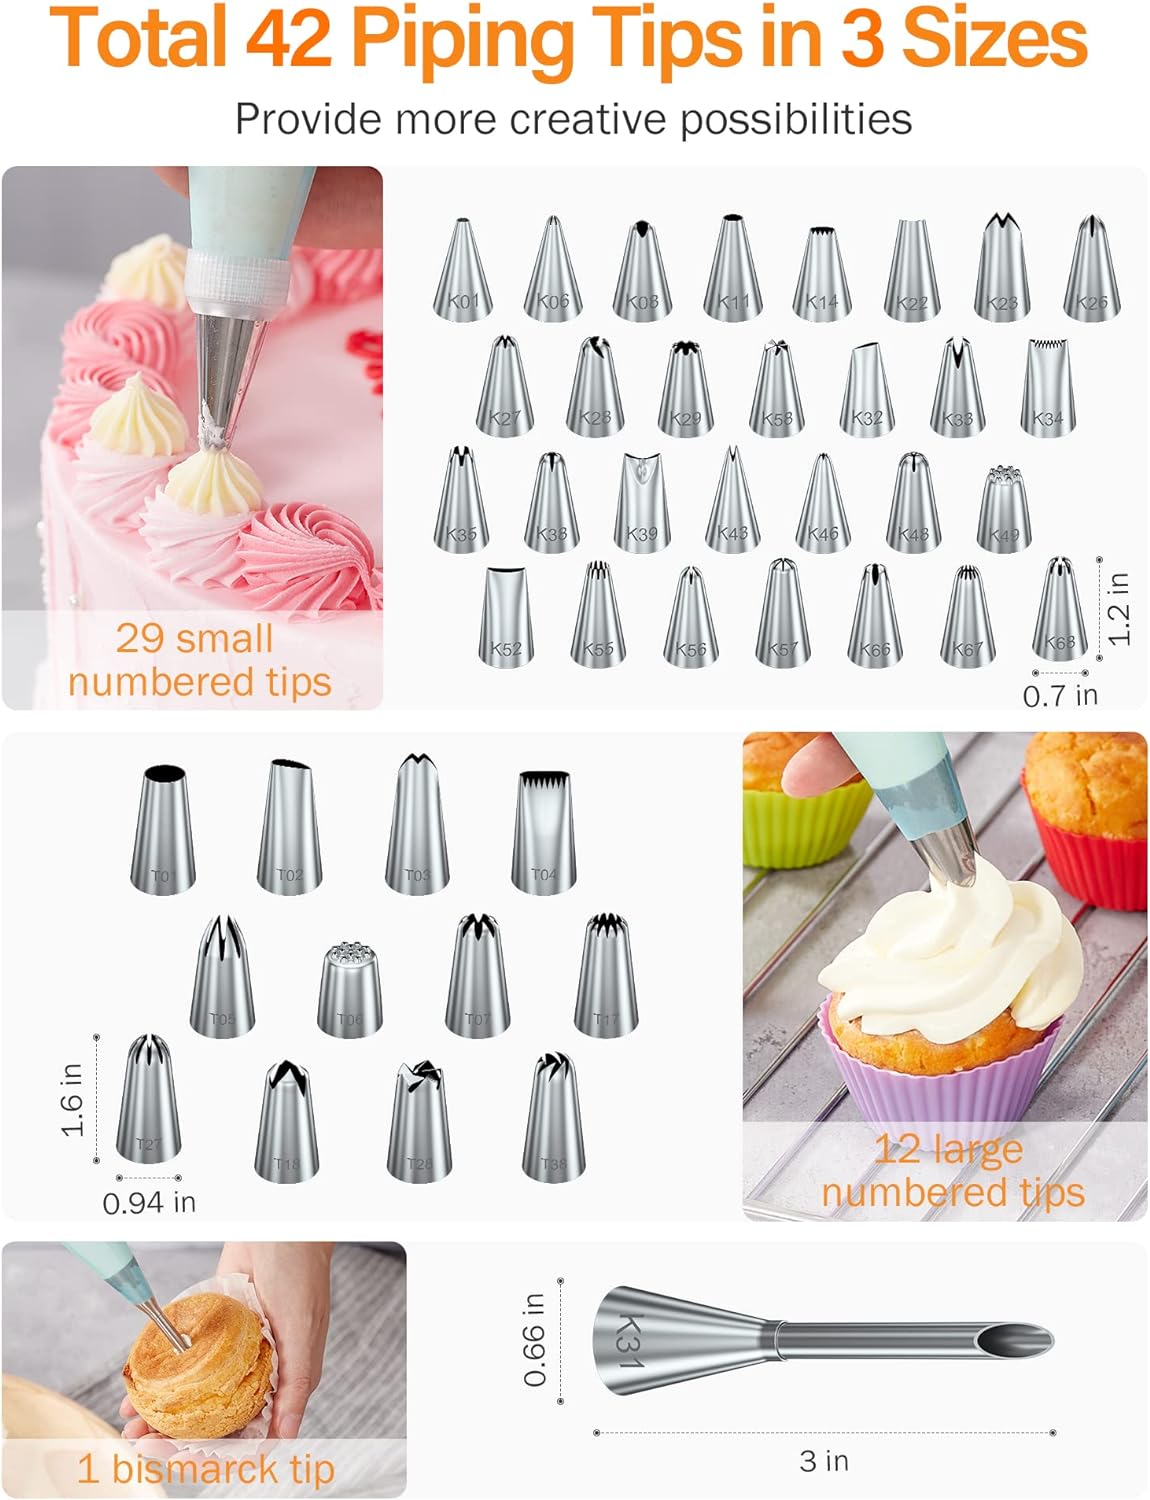 Generic Kootek 178 Pcs Cake Decorating Kit Supplies with Cake Turntable Numbered Piping Tips E-book Guide Pastry Bags Frosting Spatula